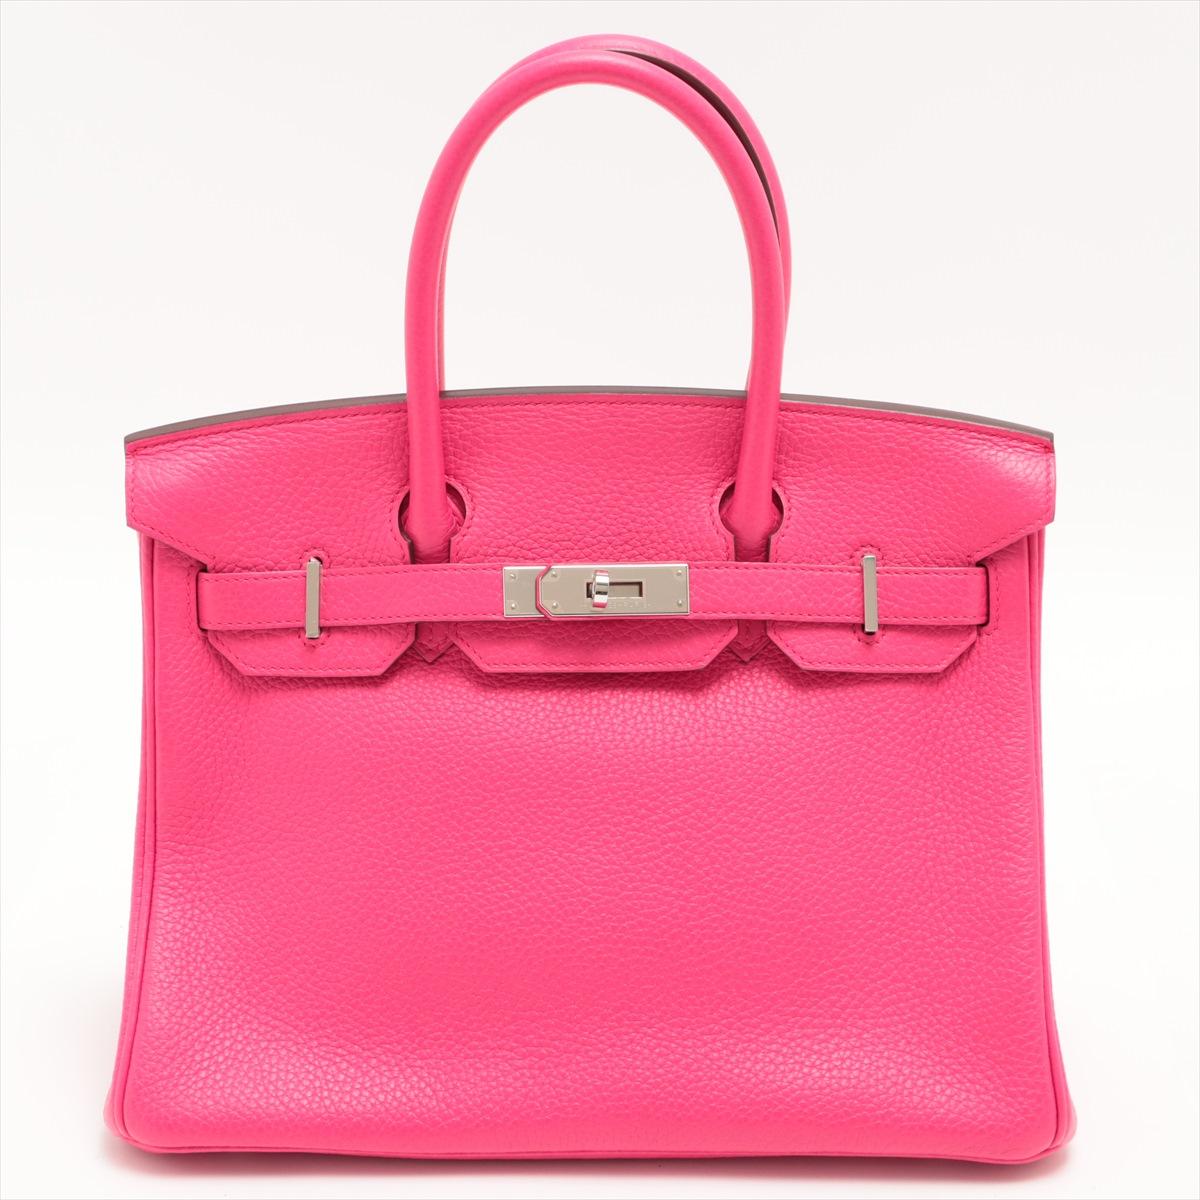 The Hermes Birkin 30 Taurillon Clemence in Rose is the epitome of luxury and elegance. Crafted with the utmost care and attention to detail, the iconic handbag is a symbol of sophistication and timeless style. Made from exquisite Taurillon Clemence